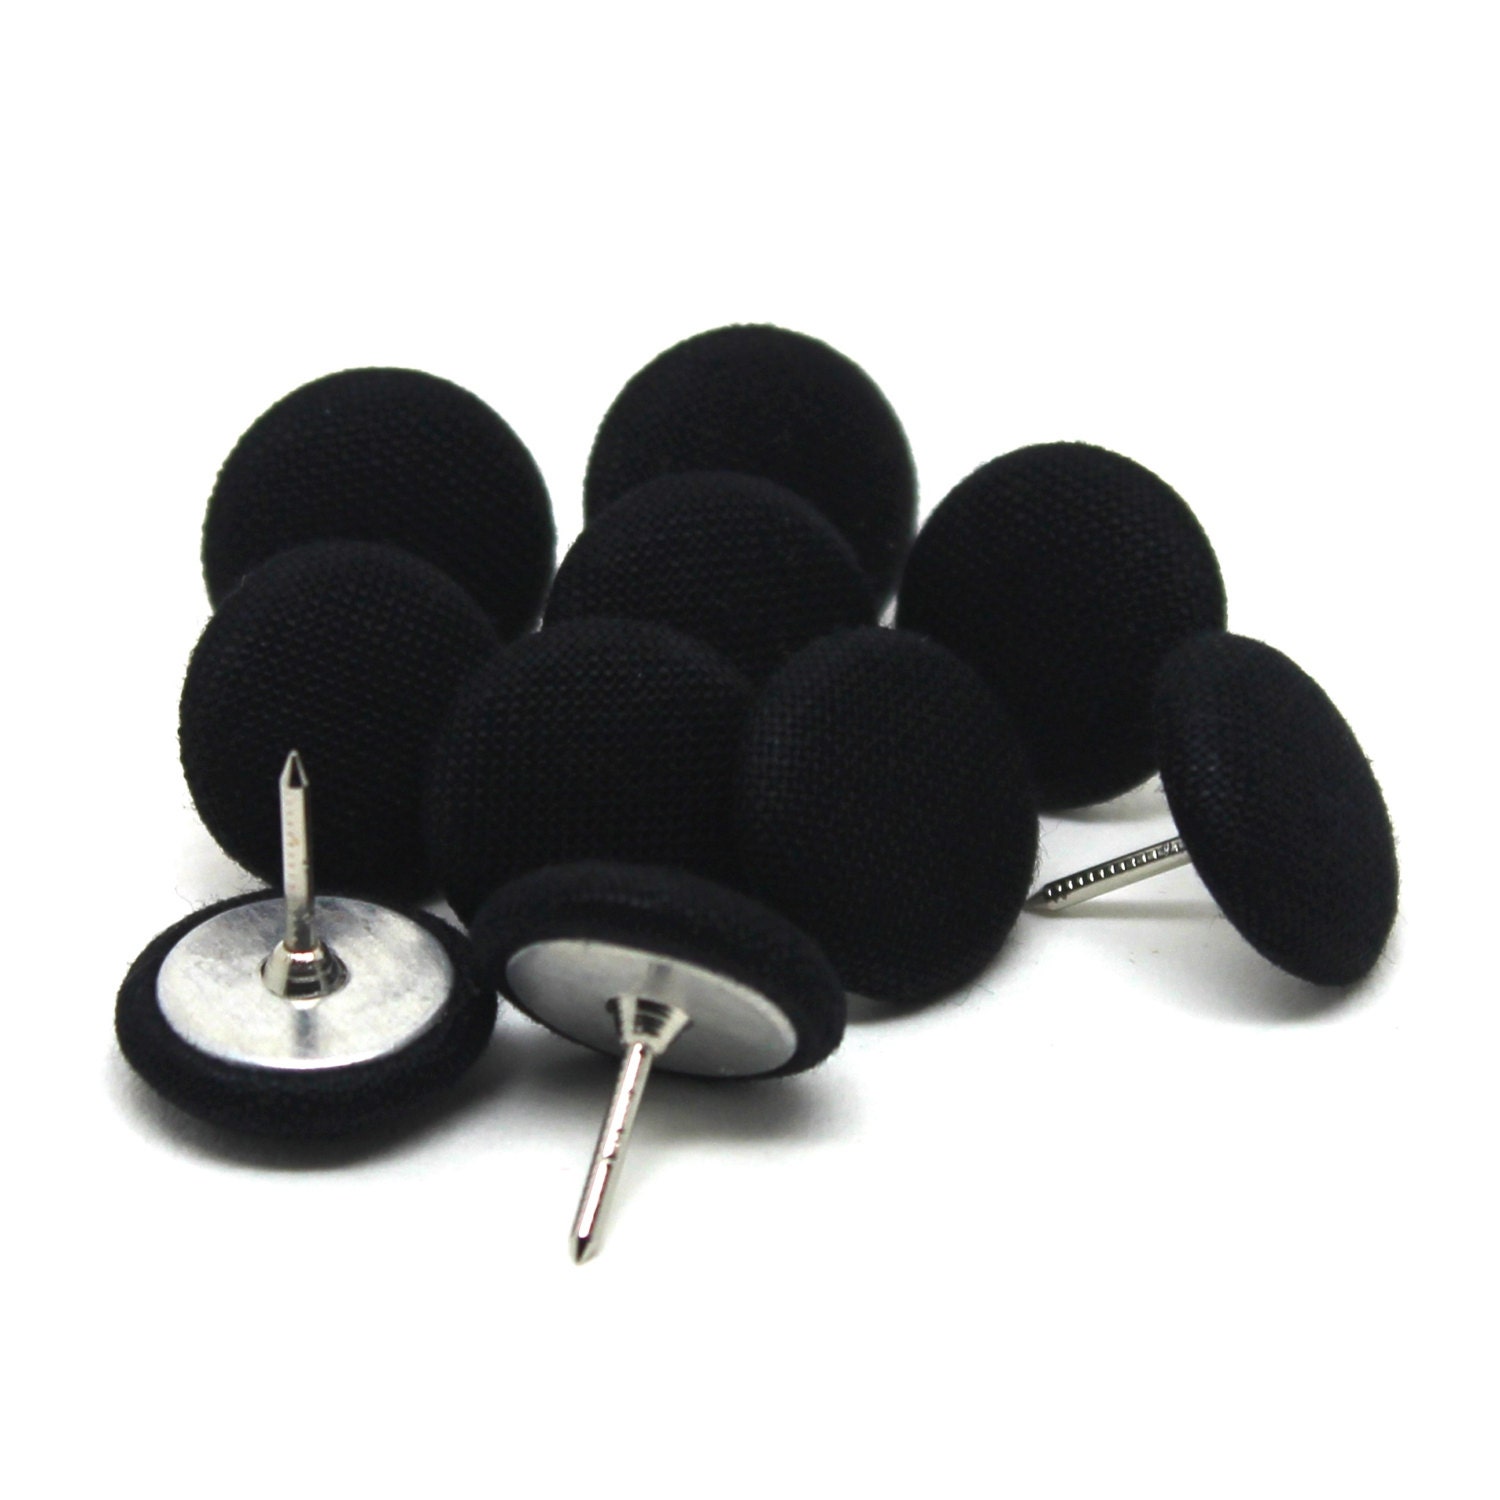 10 Small Black Fabric Push Pins Black Drawing By Thepatternrepeat